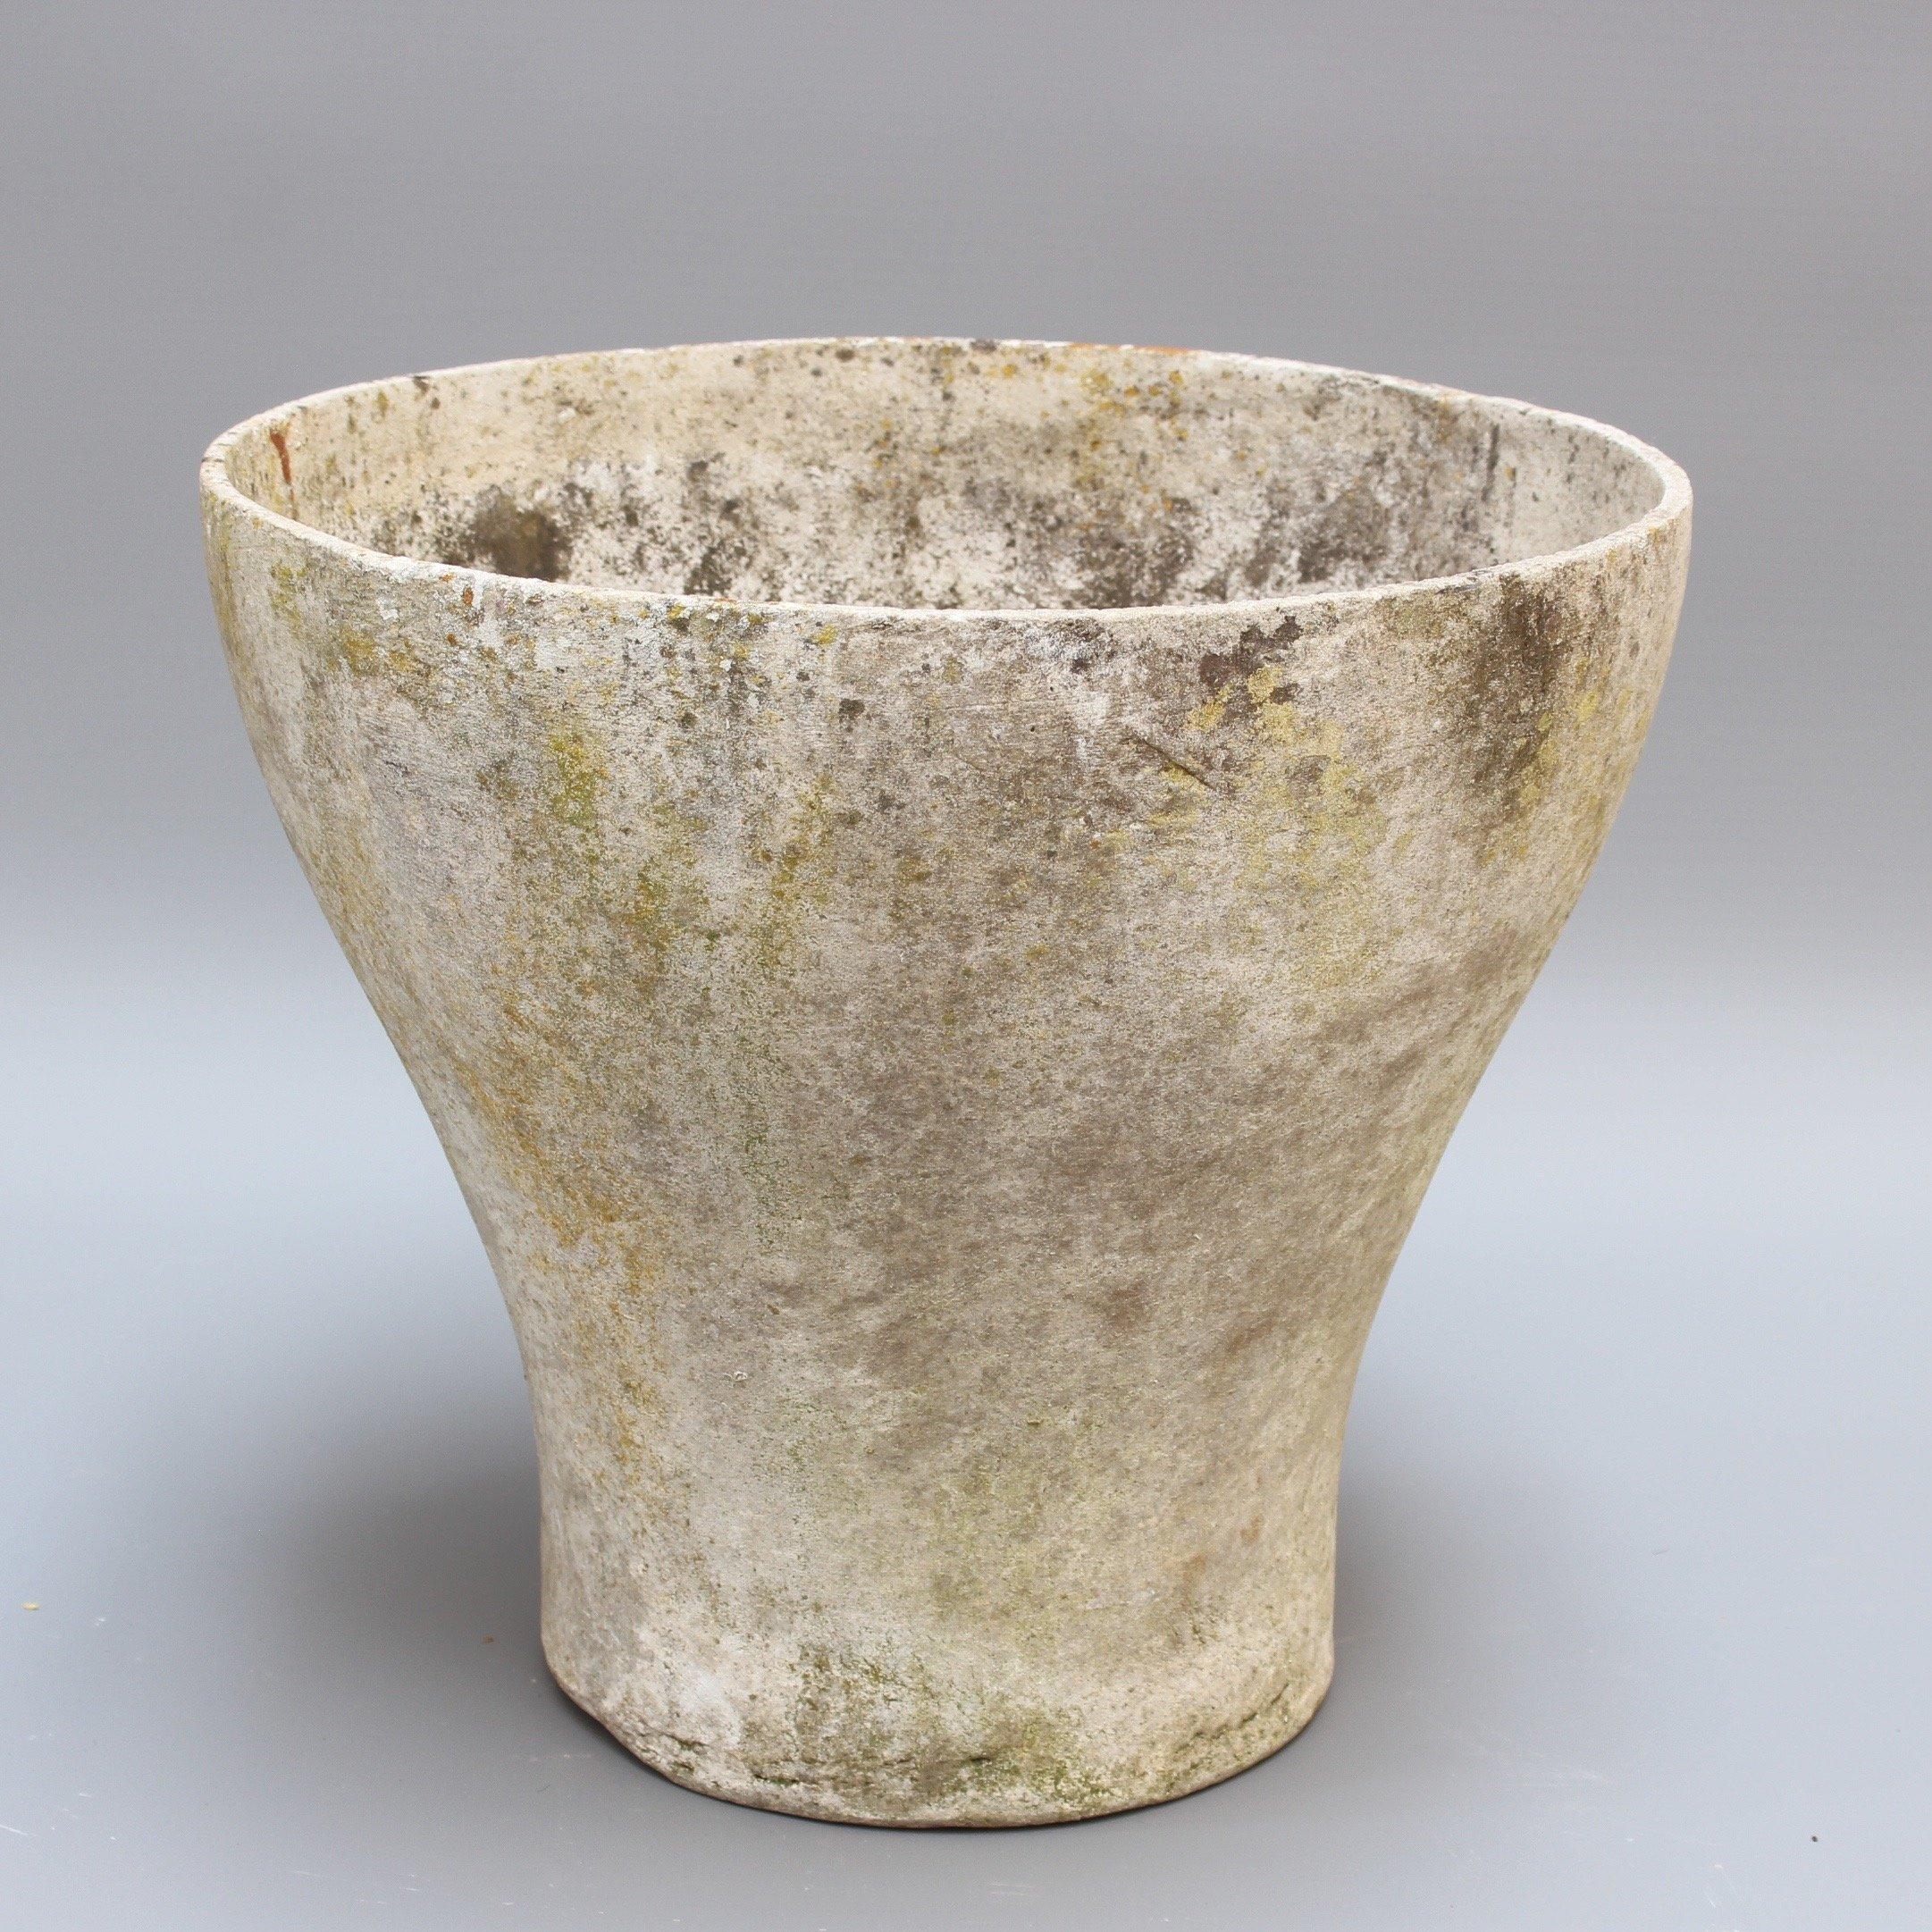 Goblet-shaped planter attributed to Willy Guhl for Eternit. In 1951, the Swiss company Eternit, which originally focused on fiber-reinforced concrete roofing and cladding, commissioned Guhl—along with his students at the School of Applied Arts—to